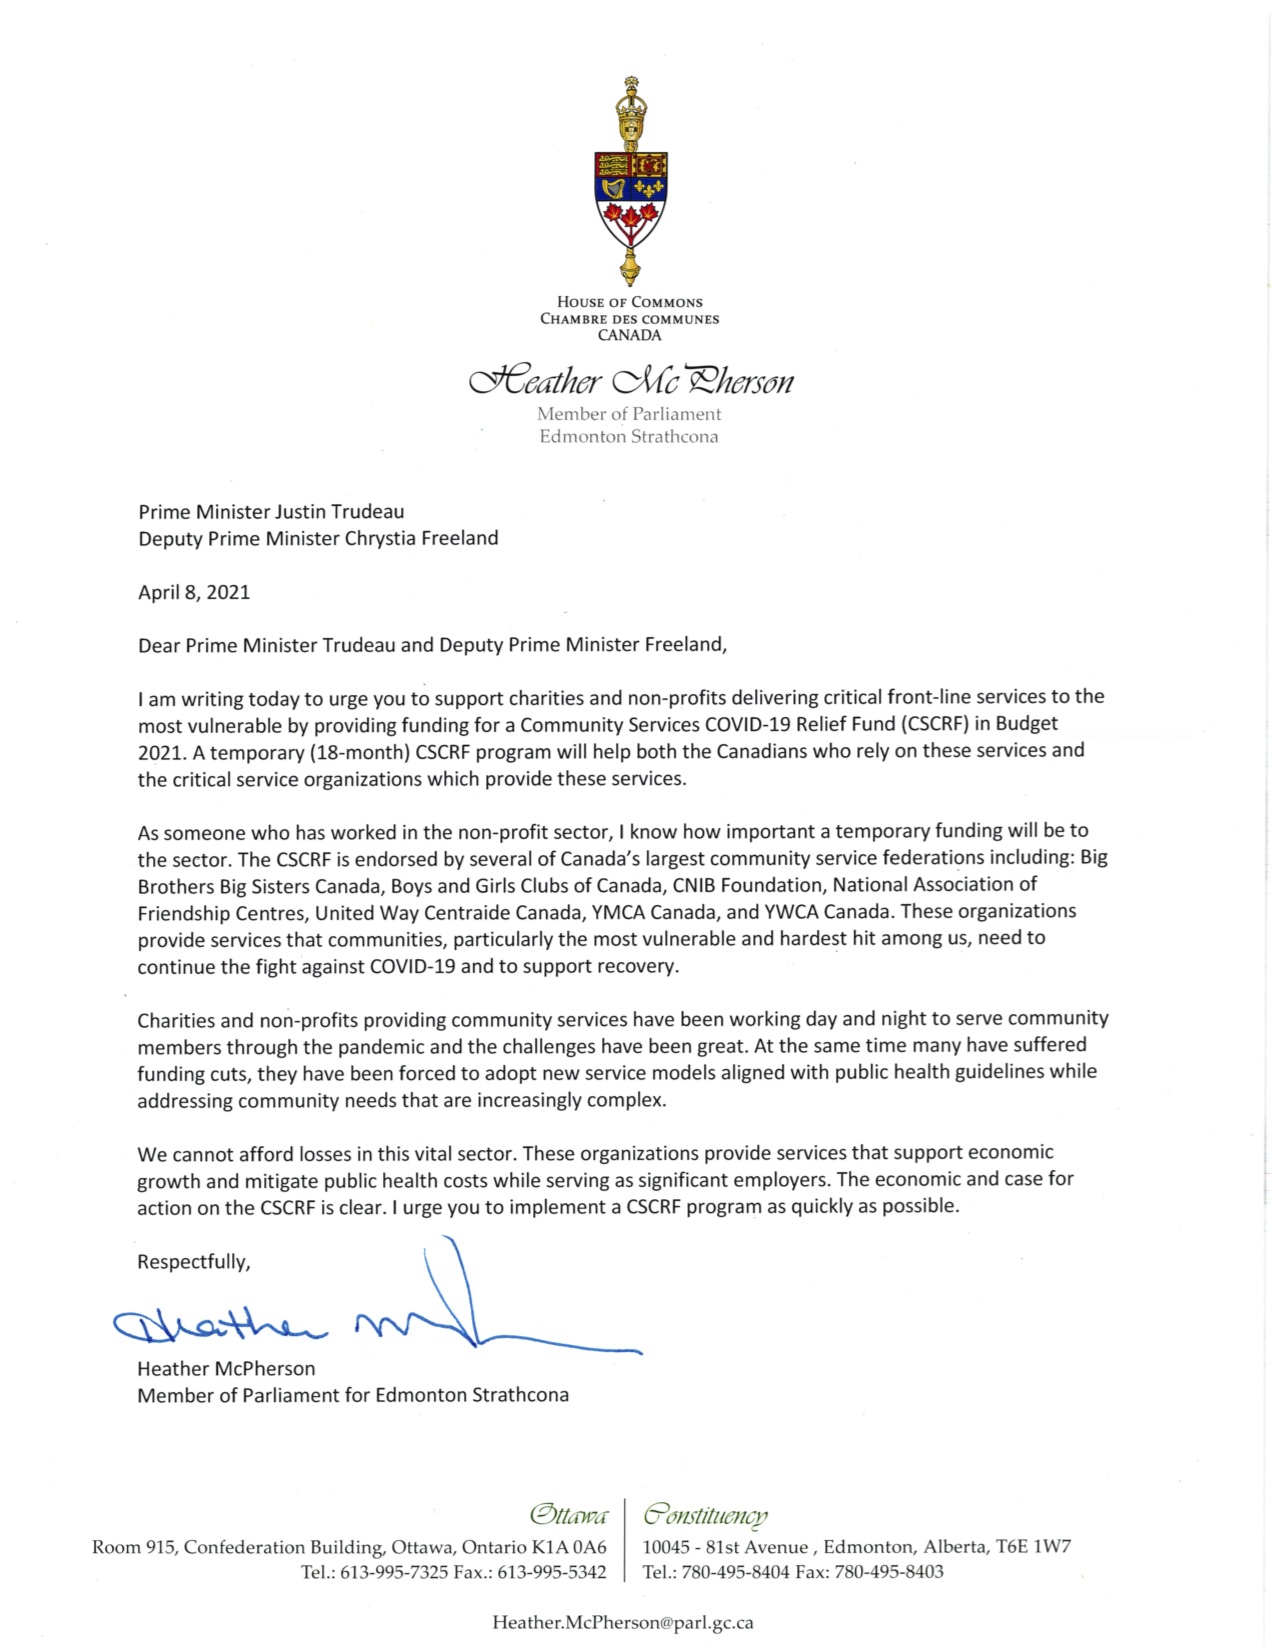 Letter Regarding the need for a Community Services COVID-19 Relief Fund